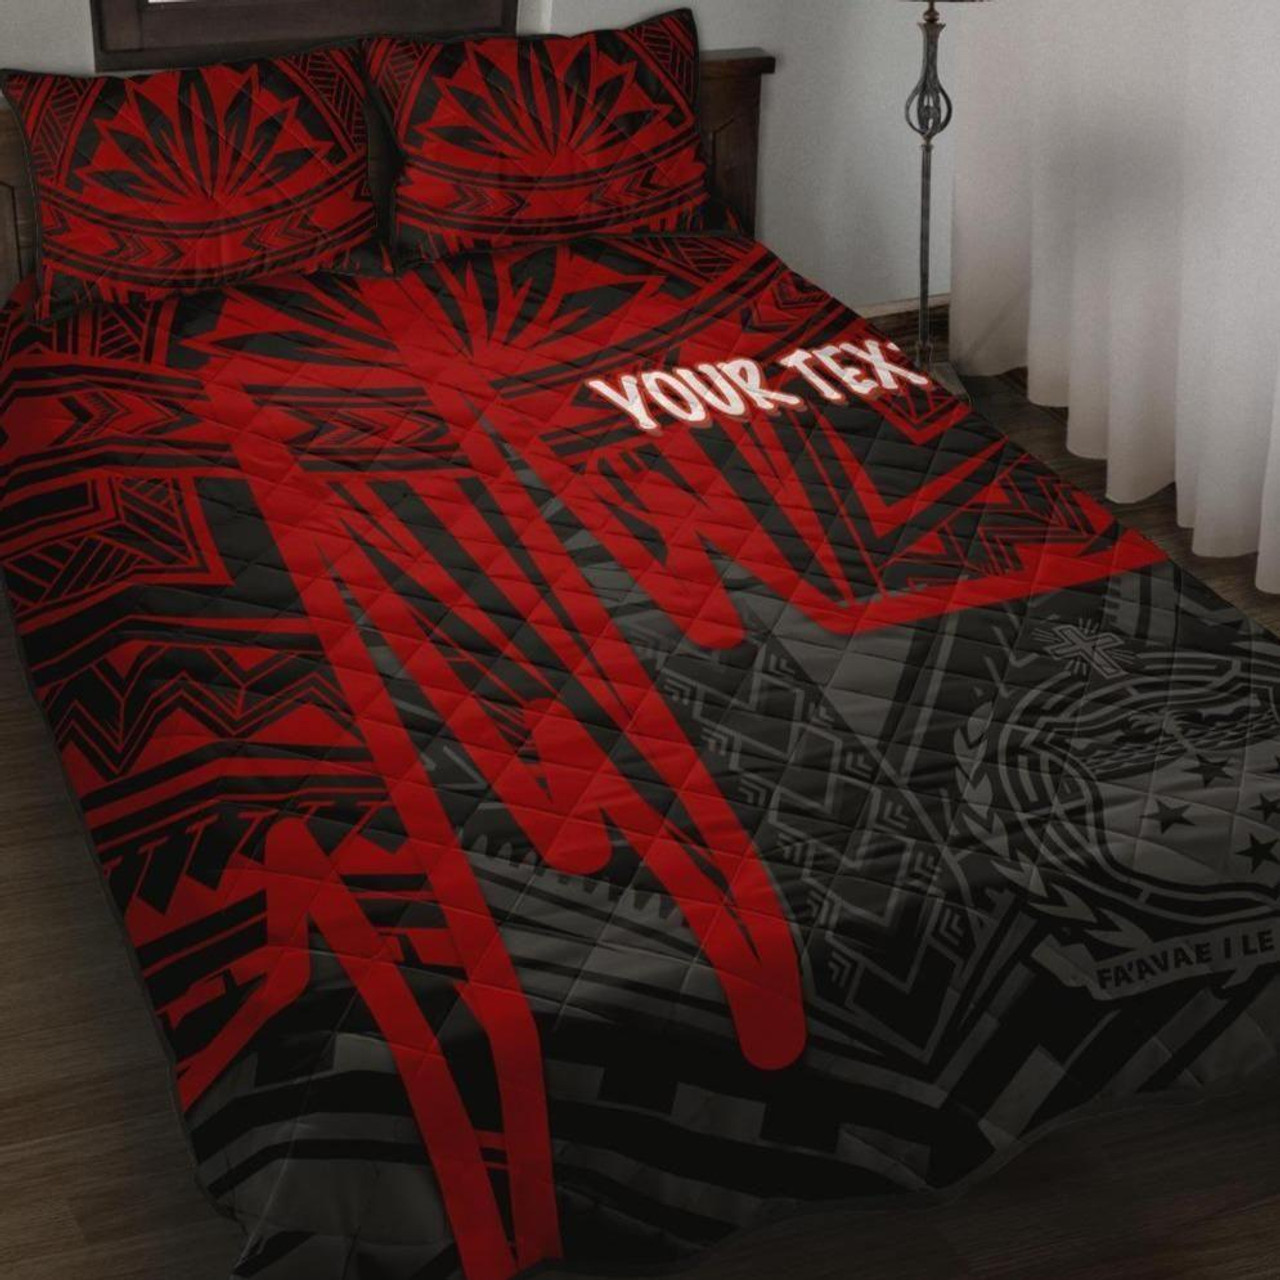 Samoa Personalised Quilt Bed Set - Samoa Seal With Polynesian Pattern In Heartbeat Style (Red) 1